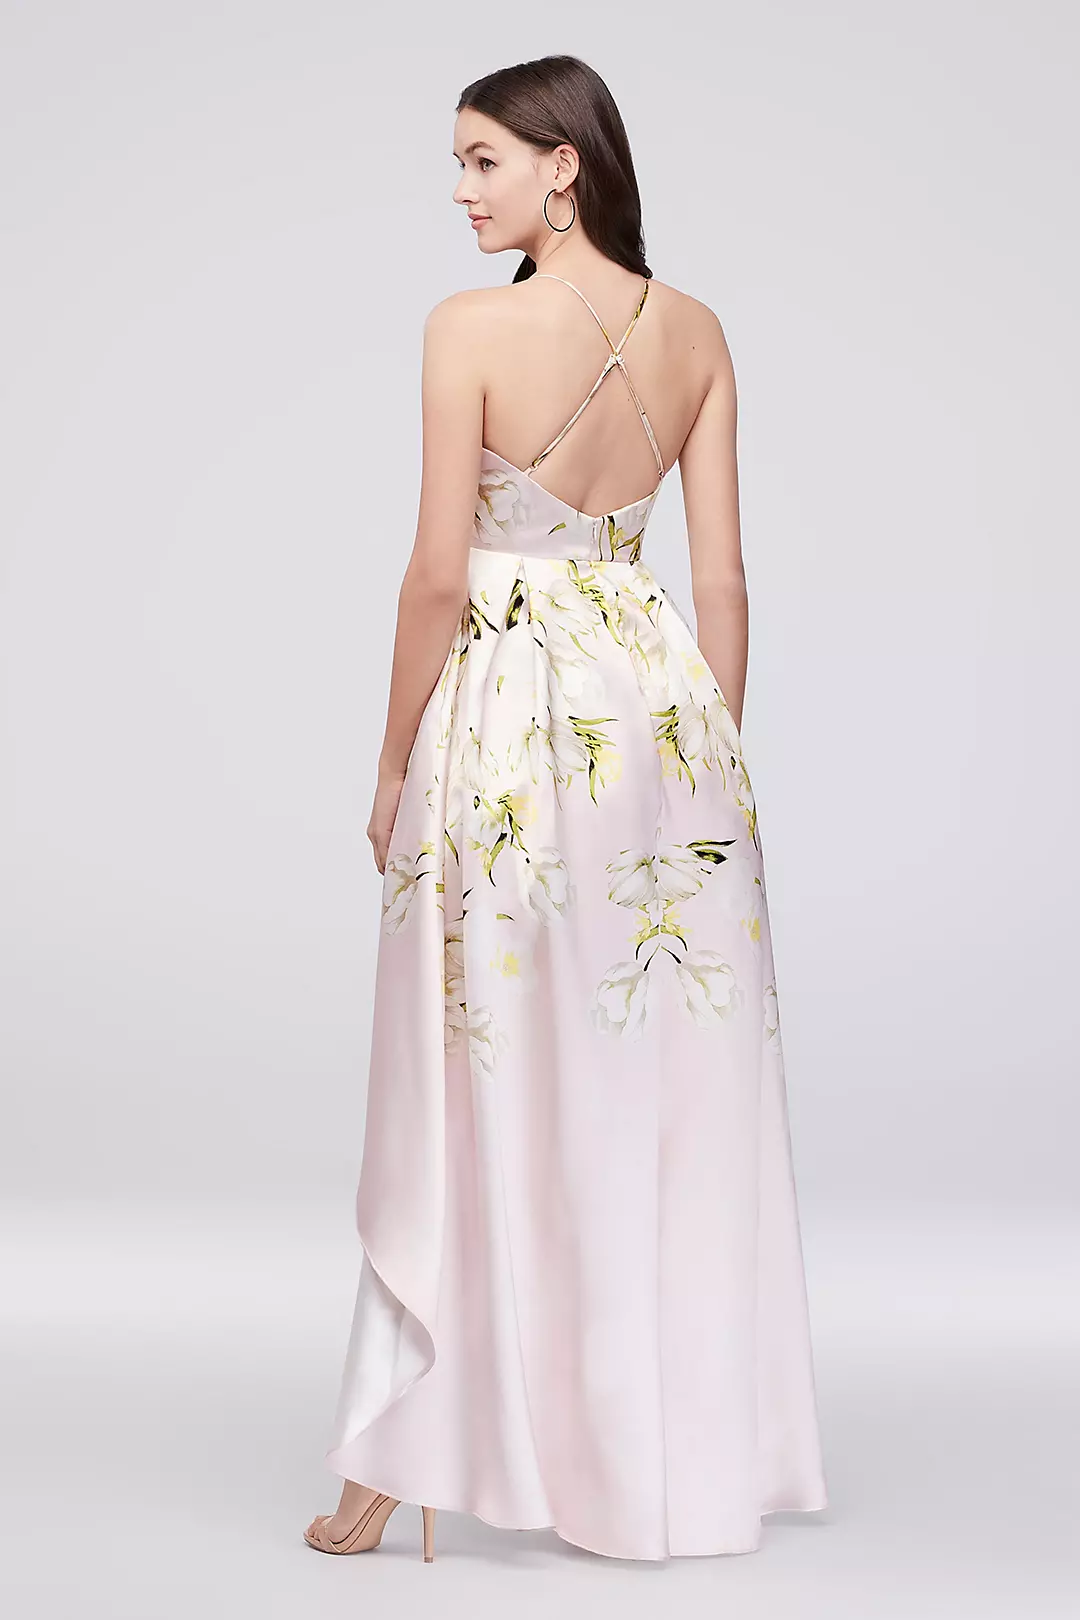 Floral Mikado Crossback High-Low Ball Gown Image 2